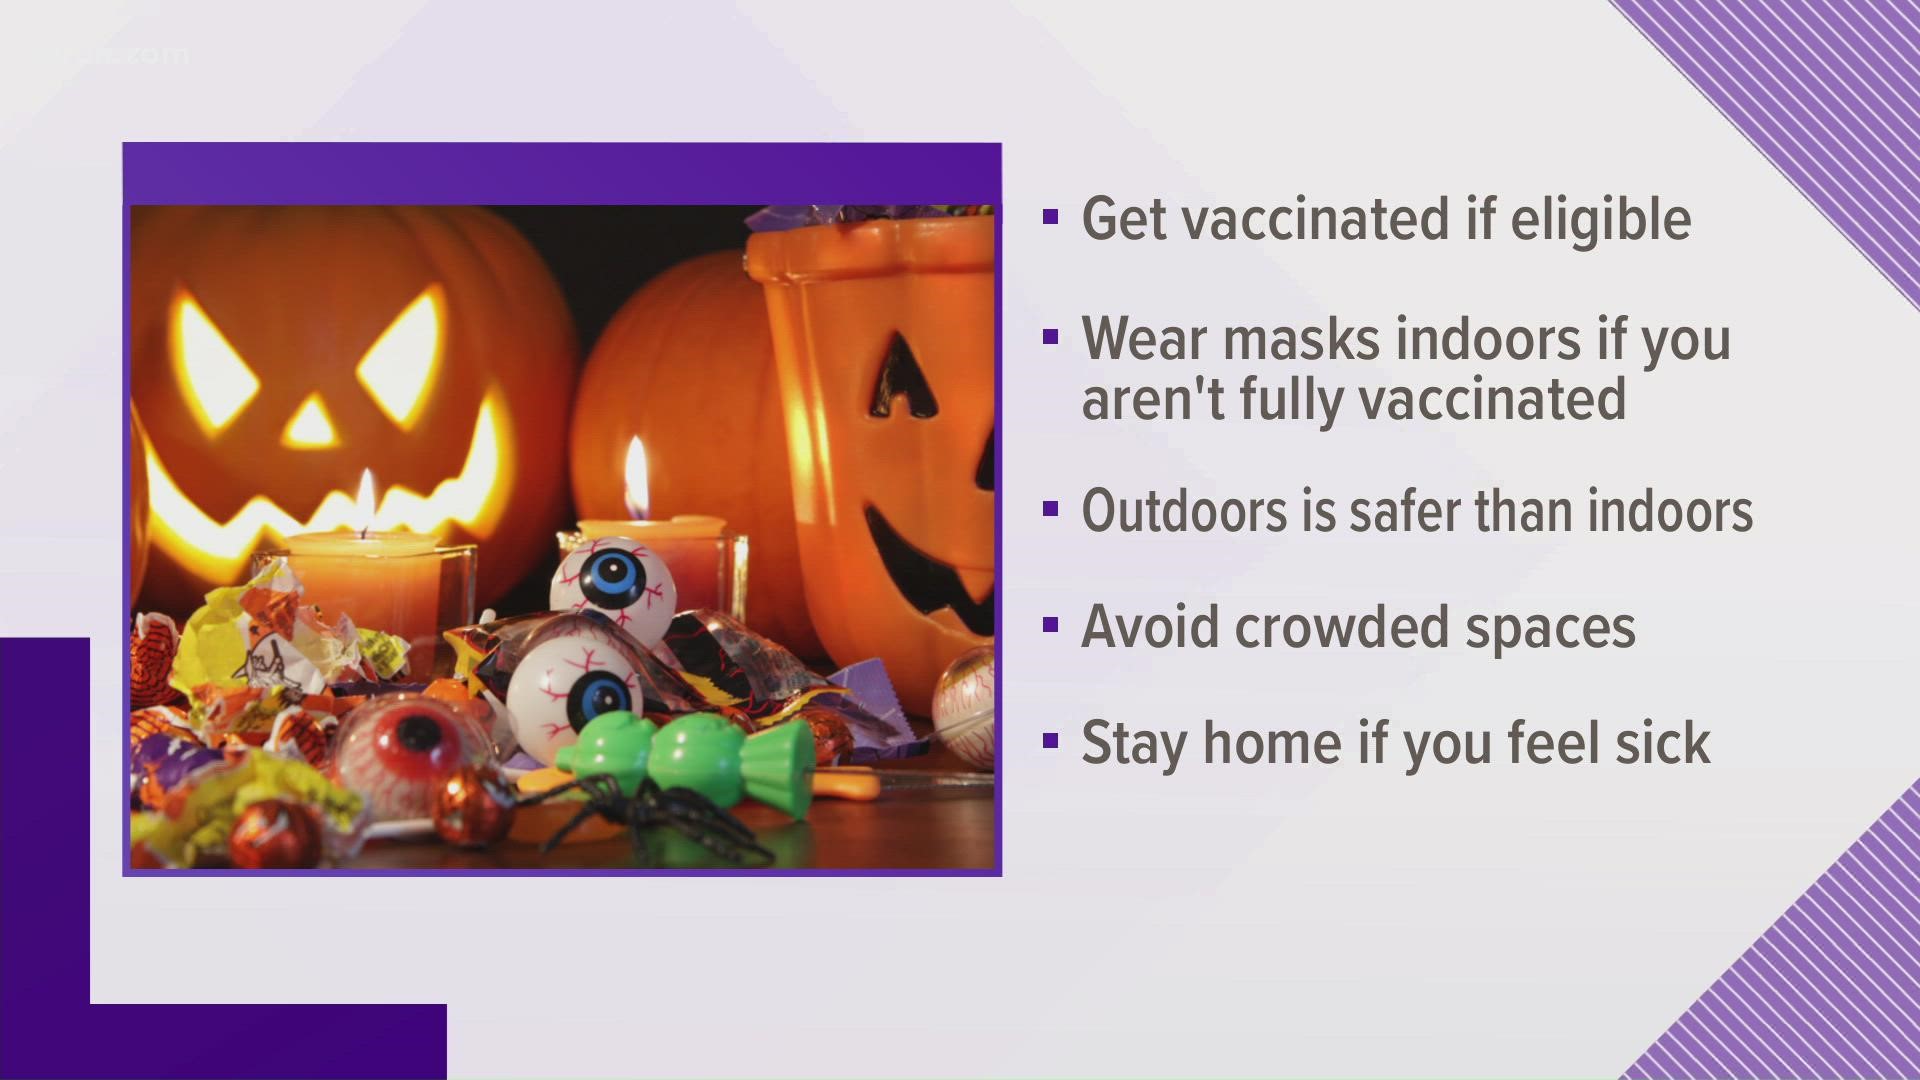 Dr. Bradley Berg, a pediatrician with Baylor Scott & White, said Halloween is the perfect holiday for a pandemic, since people can wear masks.